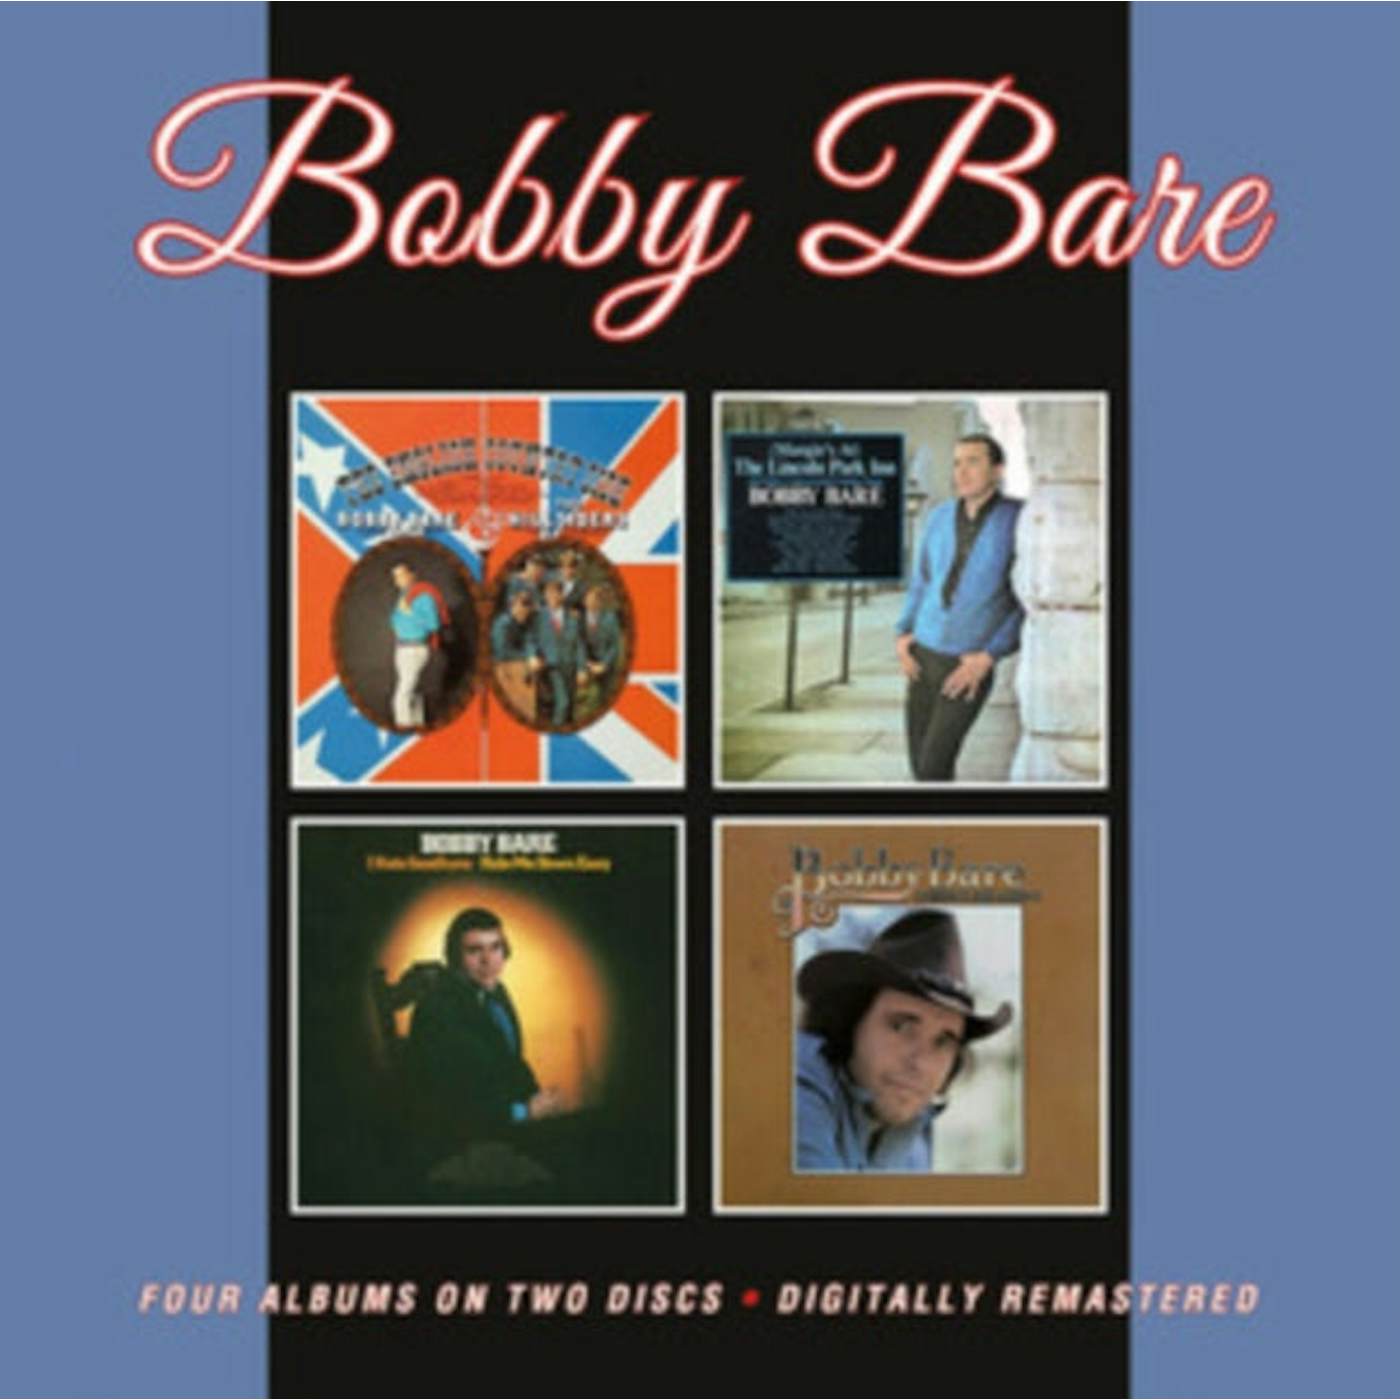 Bobby Bare CD - The English Countryside / (Margie's At) The Lincoln Park Inn And Other Controversial Country Songs / I Hate Goodbyes/Ride Me Down Easy / Cowboys And Daddys